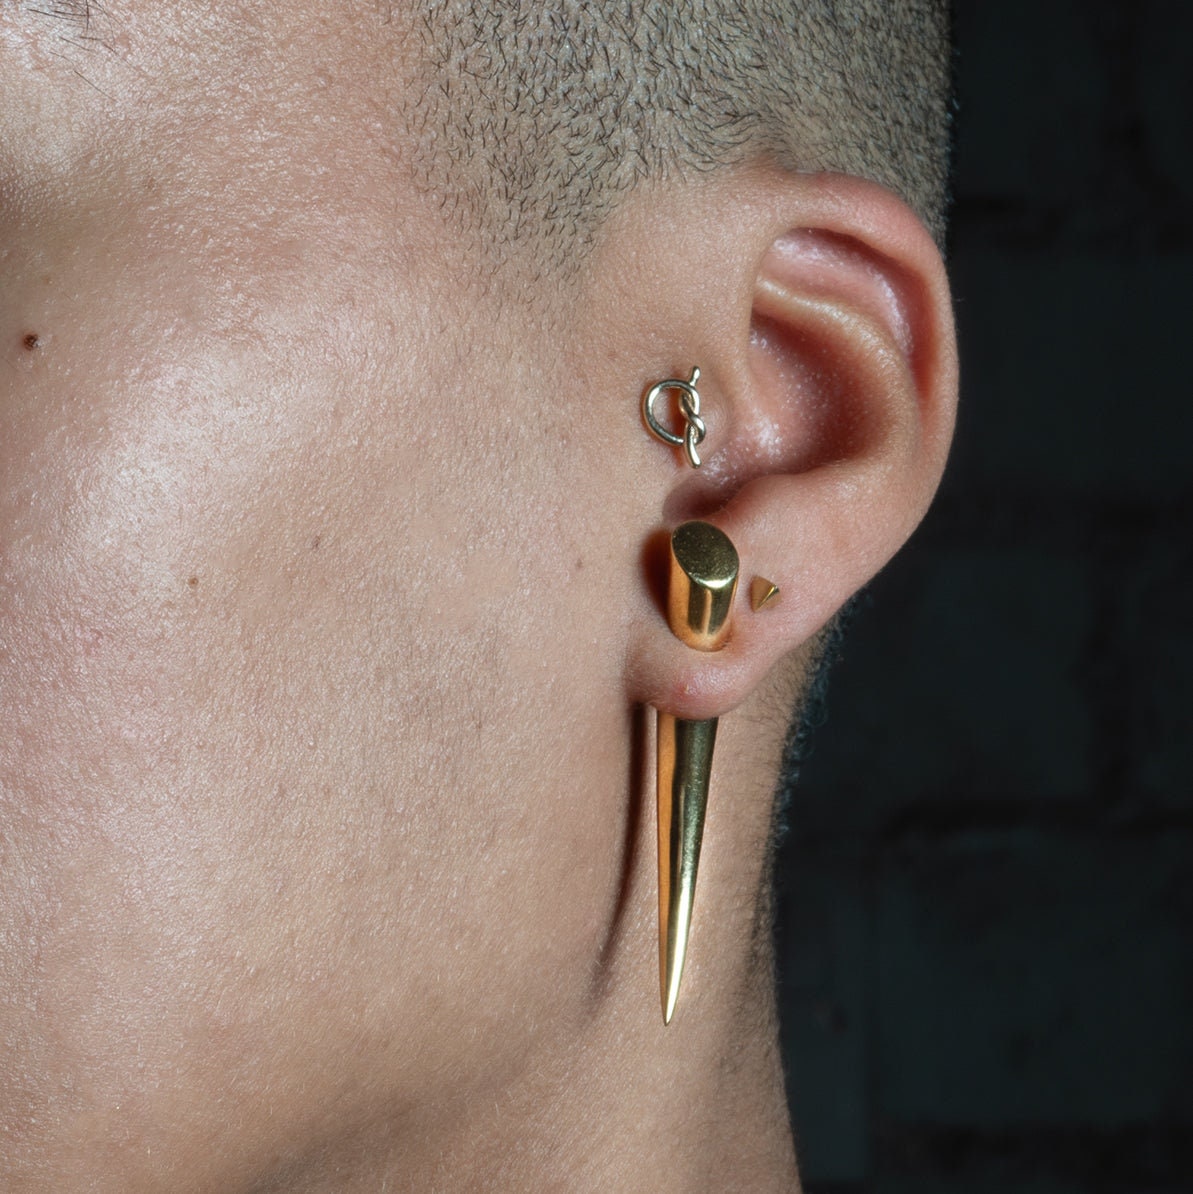 14K Gold Internally Threaded Replacement Flat Back Post, Gold / 16g: Most Cartilage Piercings / 8mm at Maison Miru